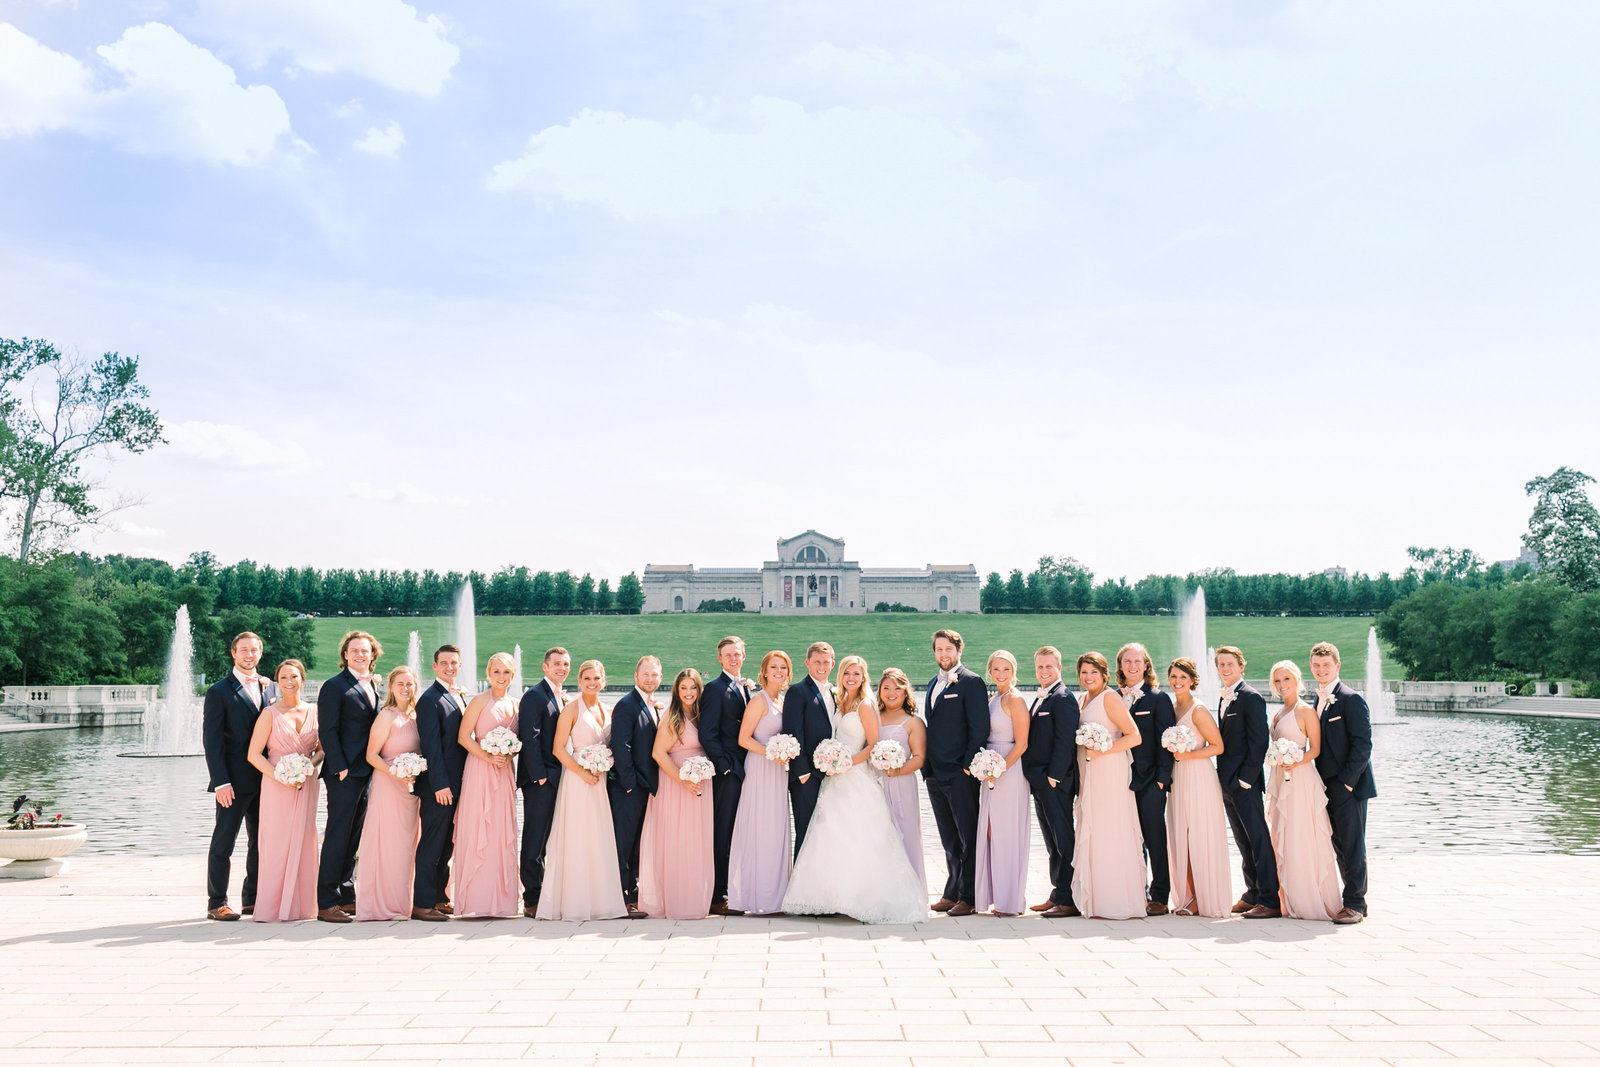 Molly and Marcus's wedding party of 22 people pose in front of the St. Louis Art Museum and Grand Basin with a beautiful clear blue sky.